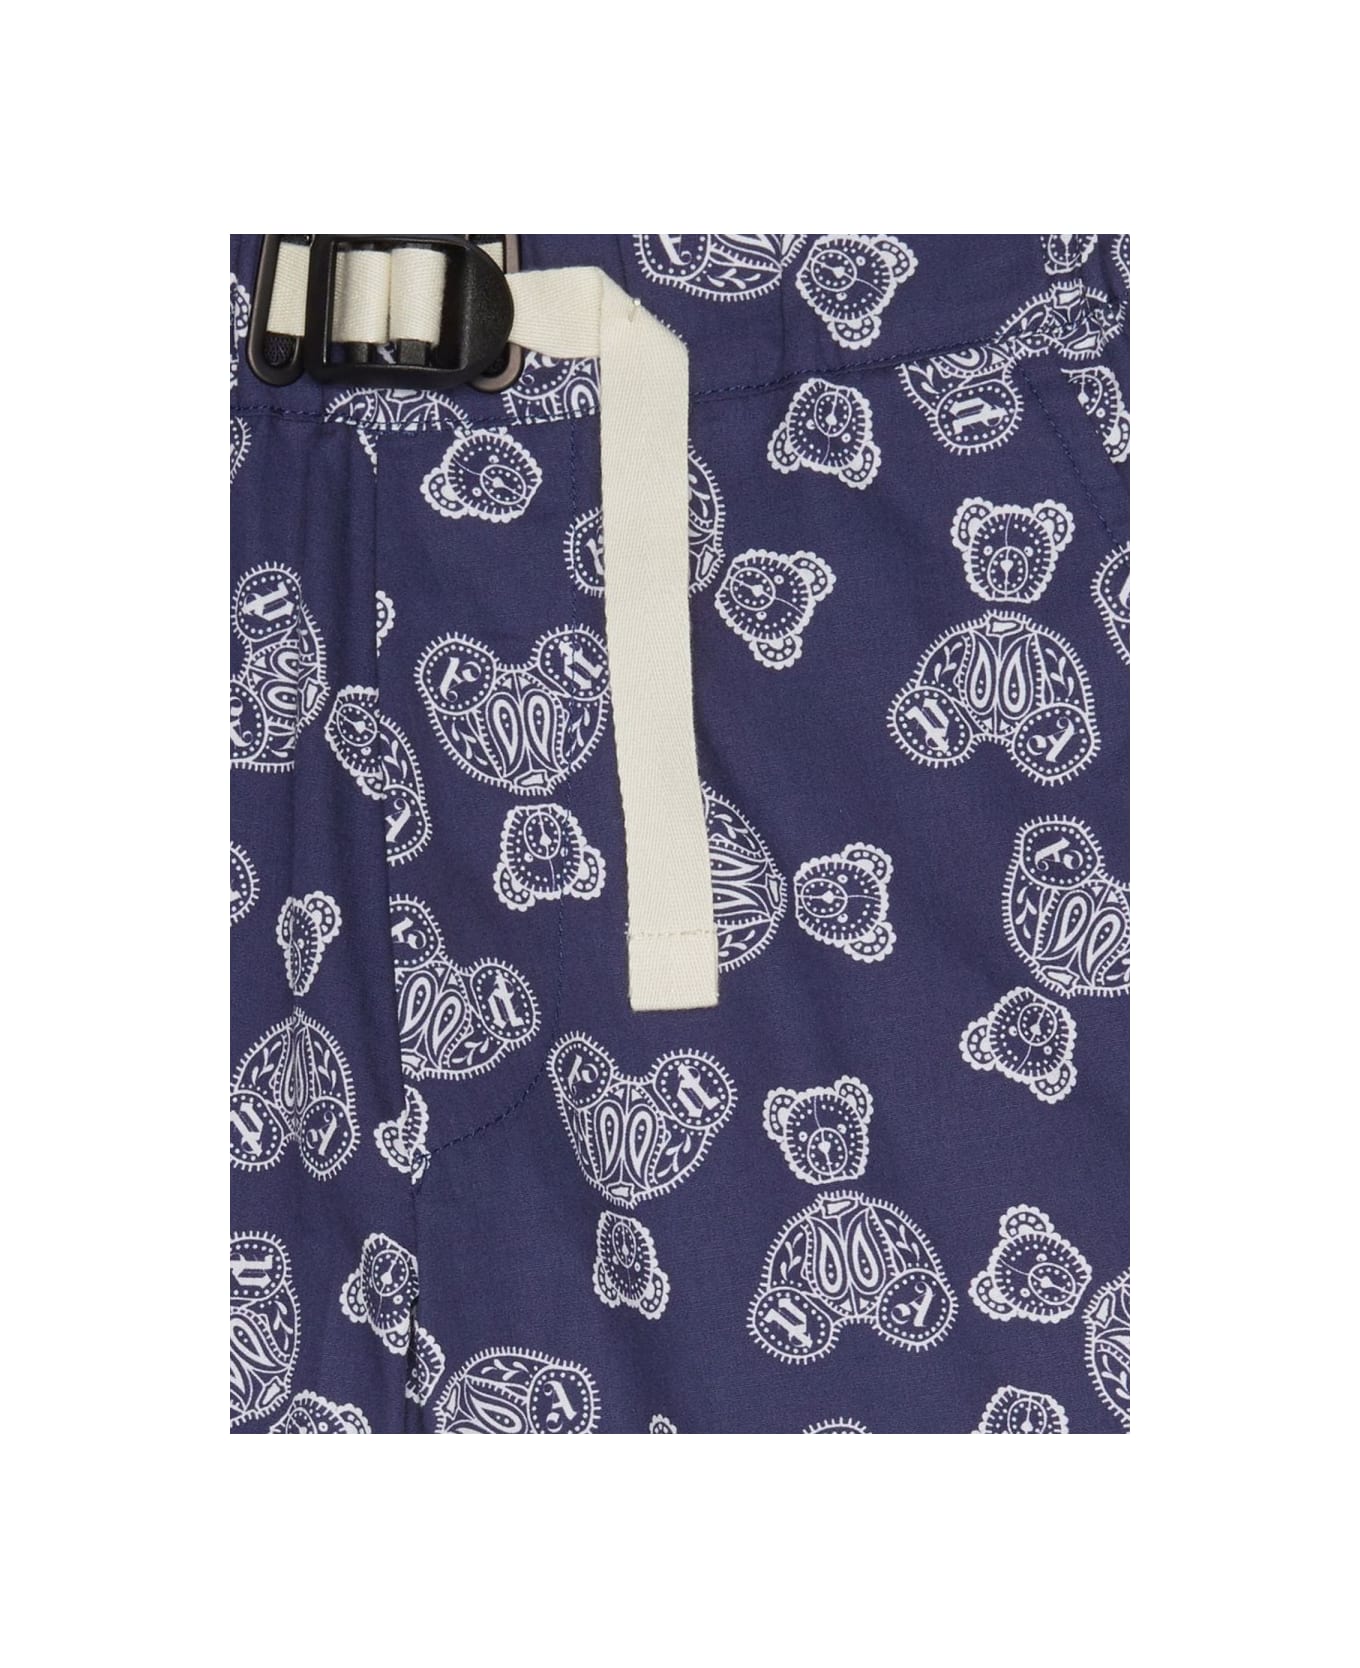 Palm Angels All Over Printed Chino Shorts - BLUE